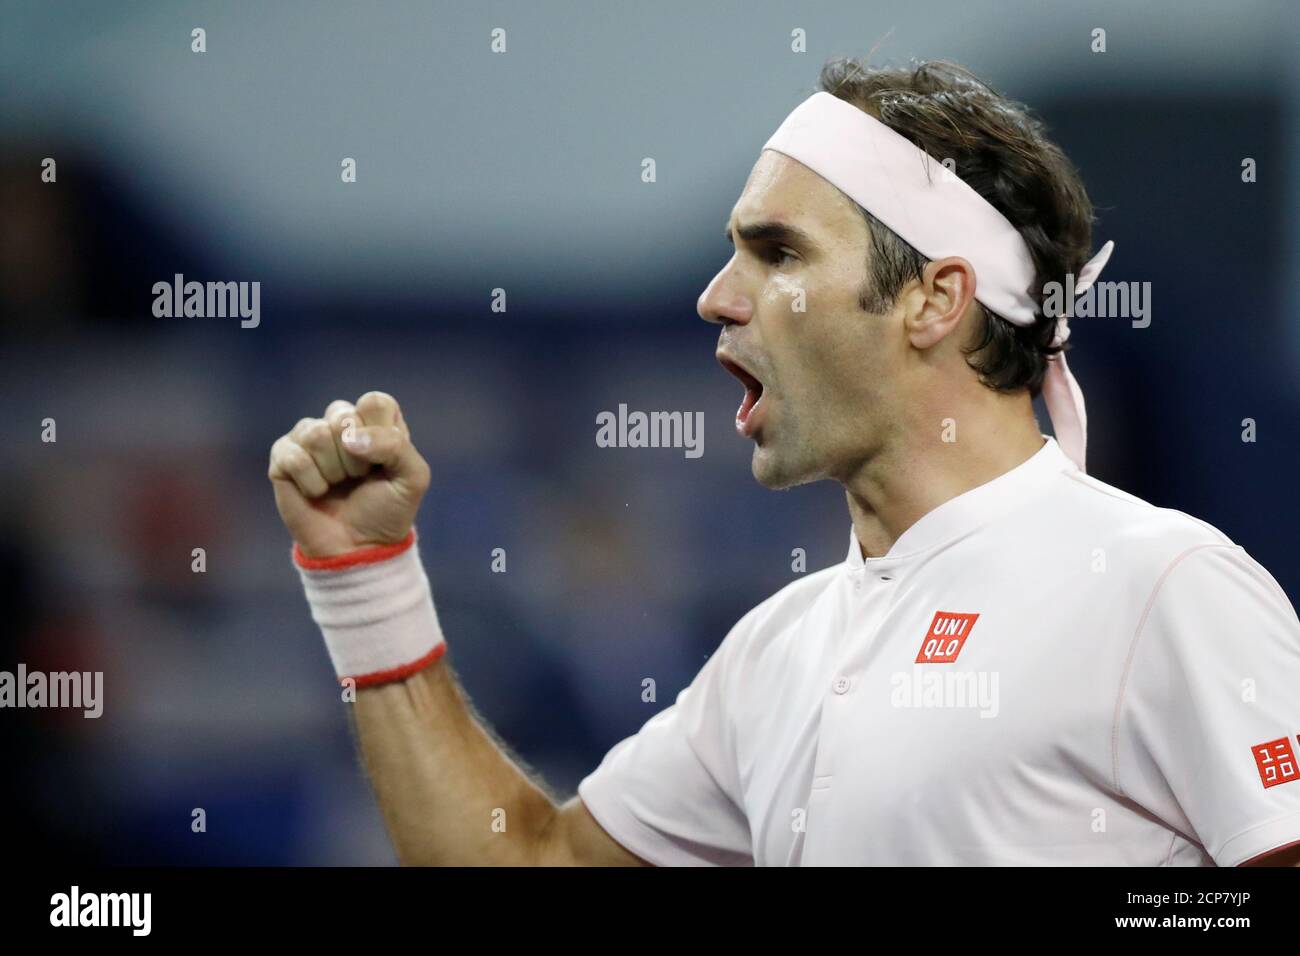 Tennis - Shanghai Masters - Shanghai, China - October 10, 2018 - Roger Federer of Switzerland celebrates his victory against Daniil Medvedev of Russia. REUTERS/Aly Song Stock Photo